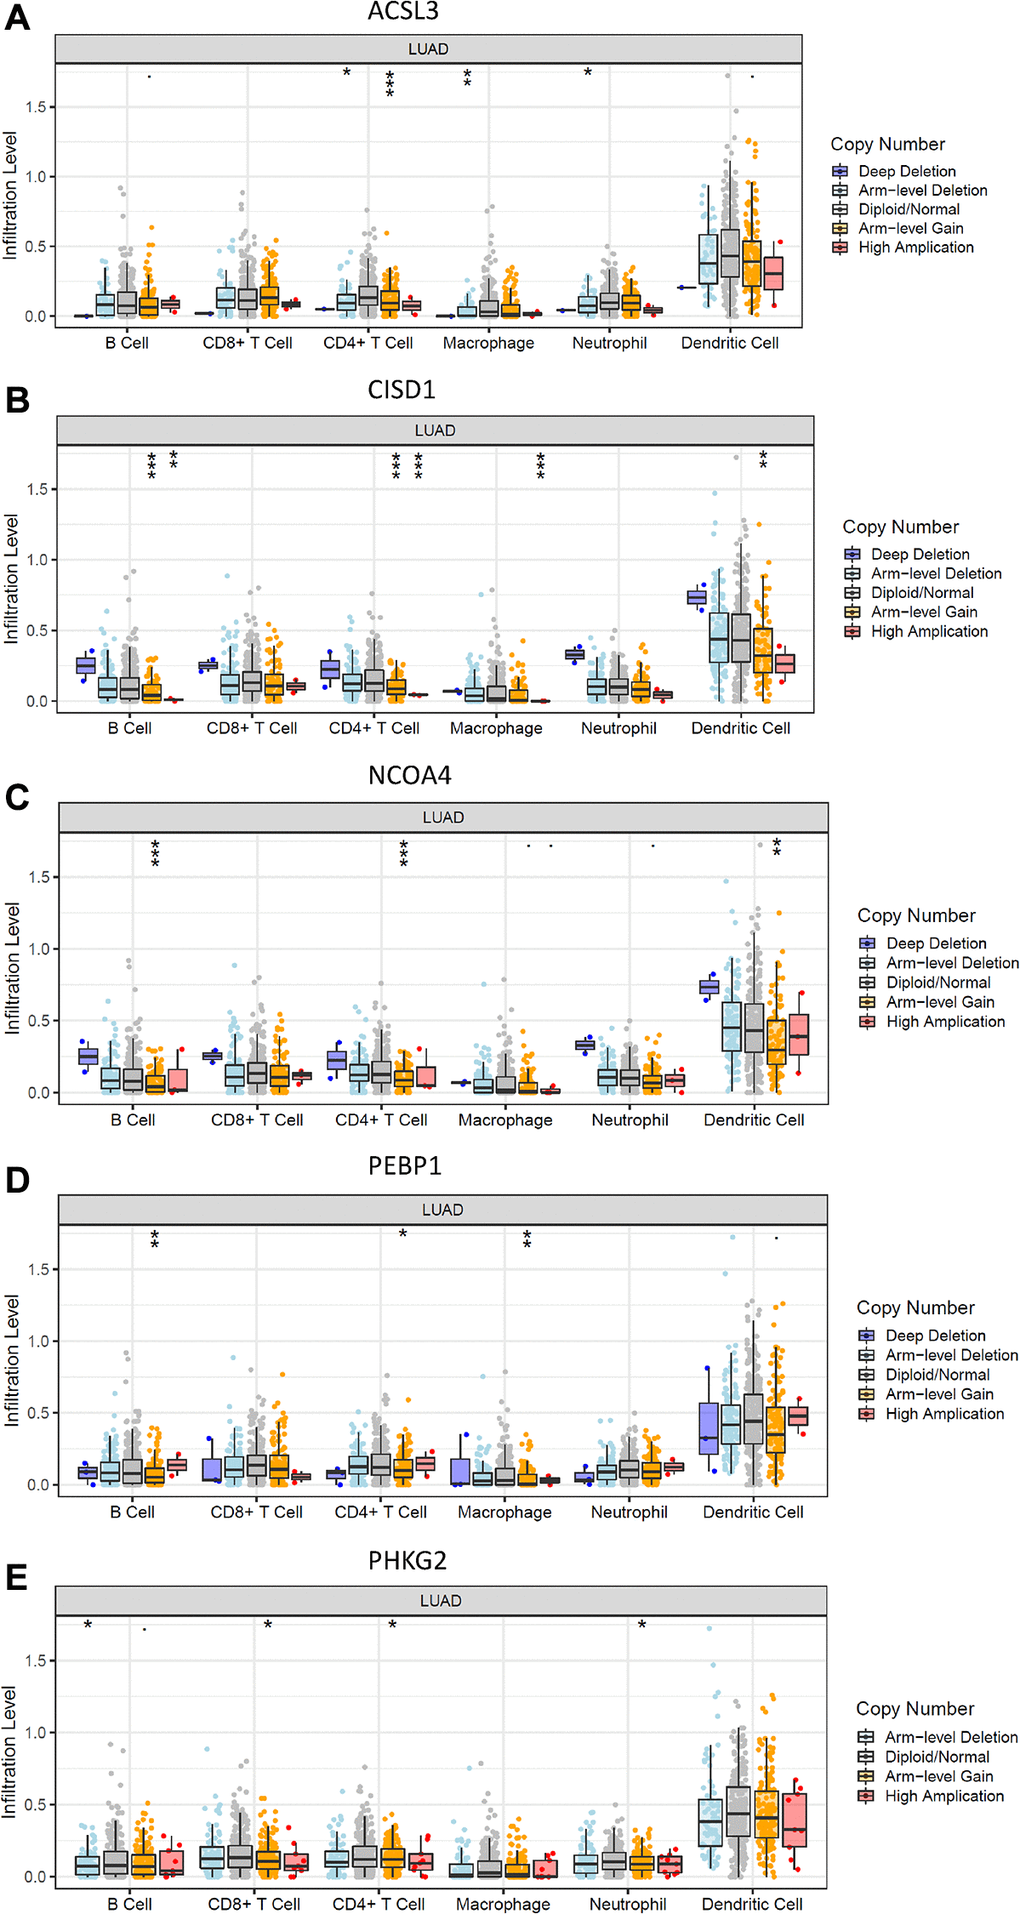 Effects of genetic alterations of FRG-relevant signatures on immune cell infiltration. (A–E) ACSL3 (A), CISD1 (B), NCOA4 (C), PEBP1 (D) and PHKG2 (E). *p **p ***p 